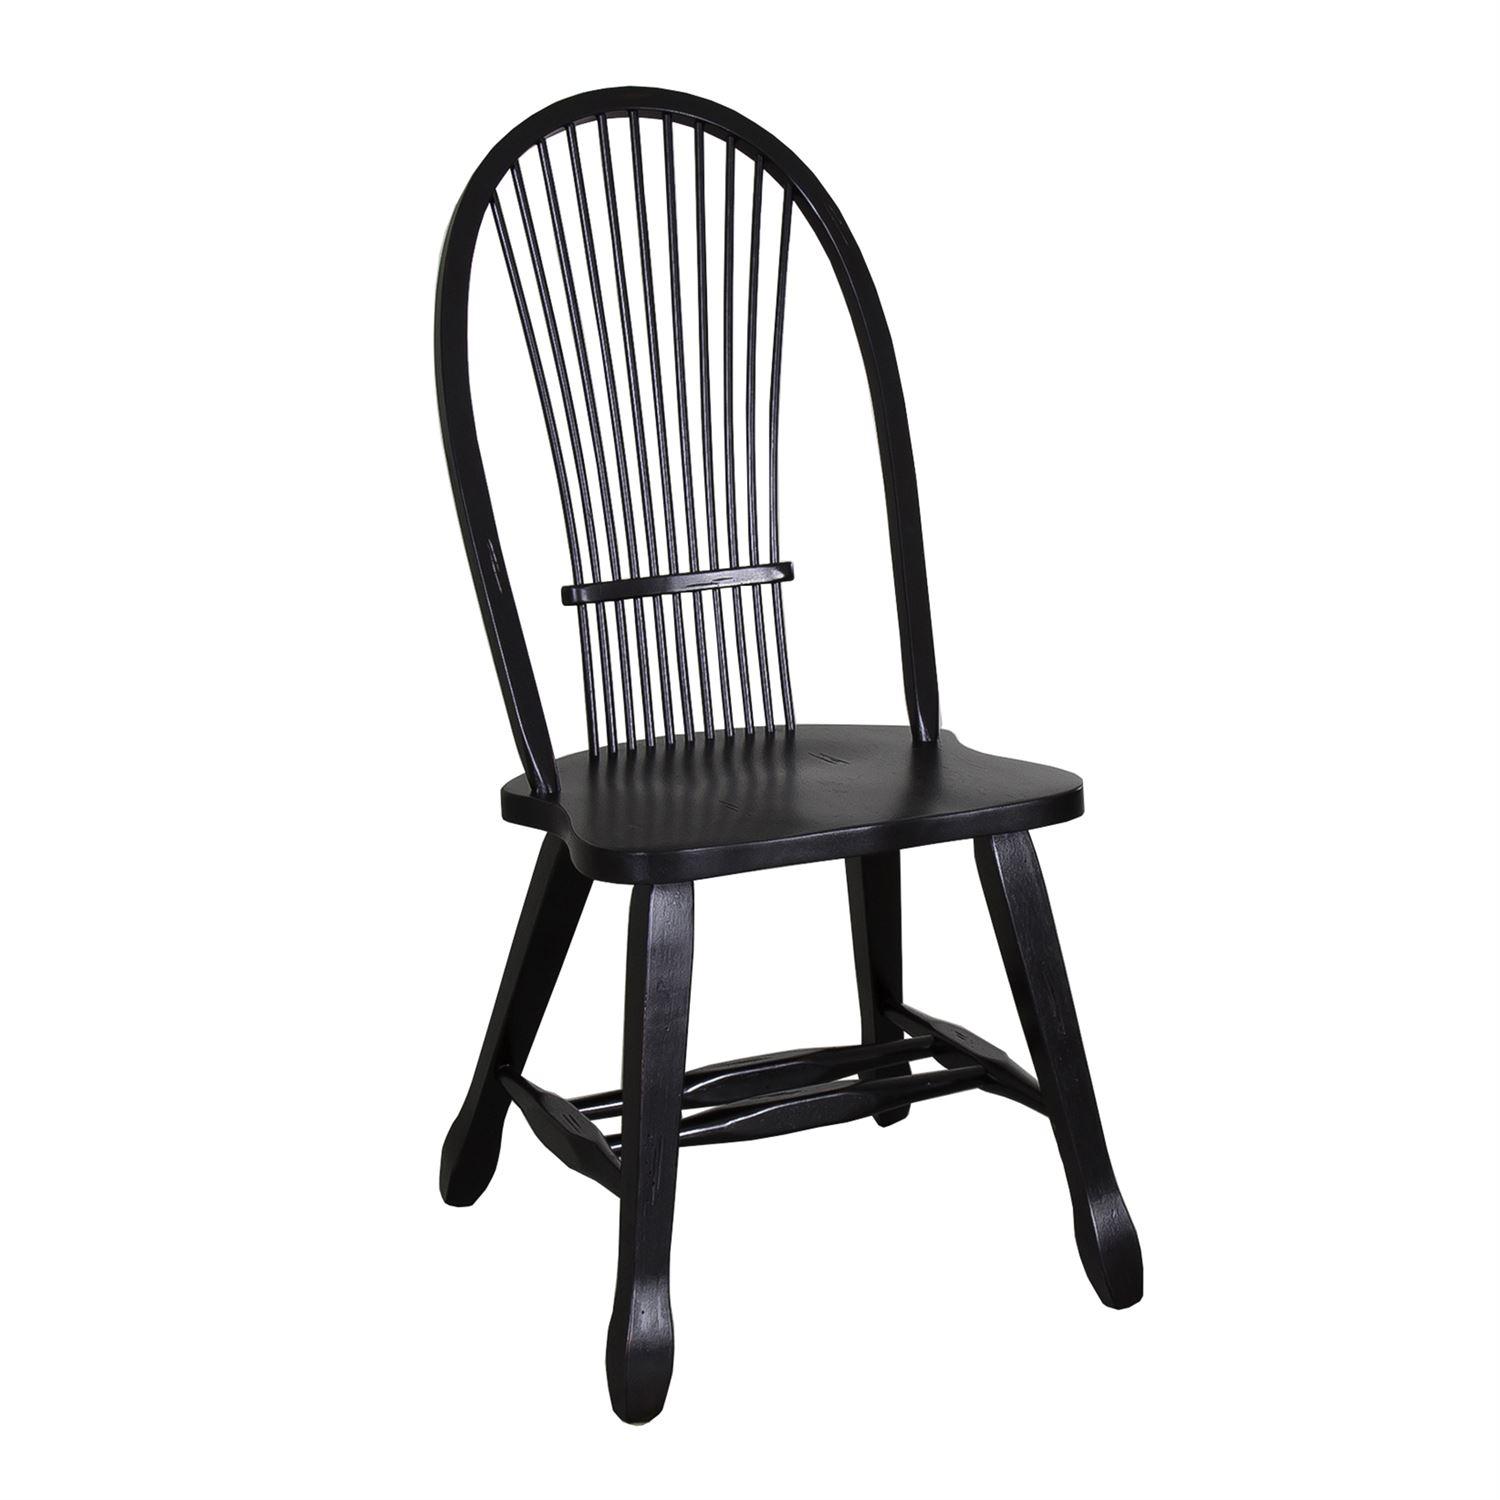   Treasures  (17-CD) Dining Side Chair  